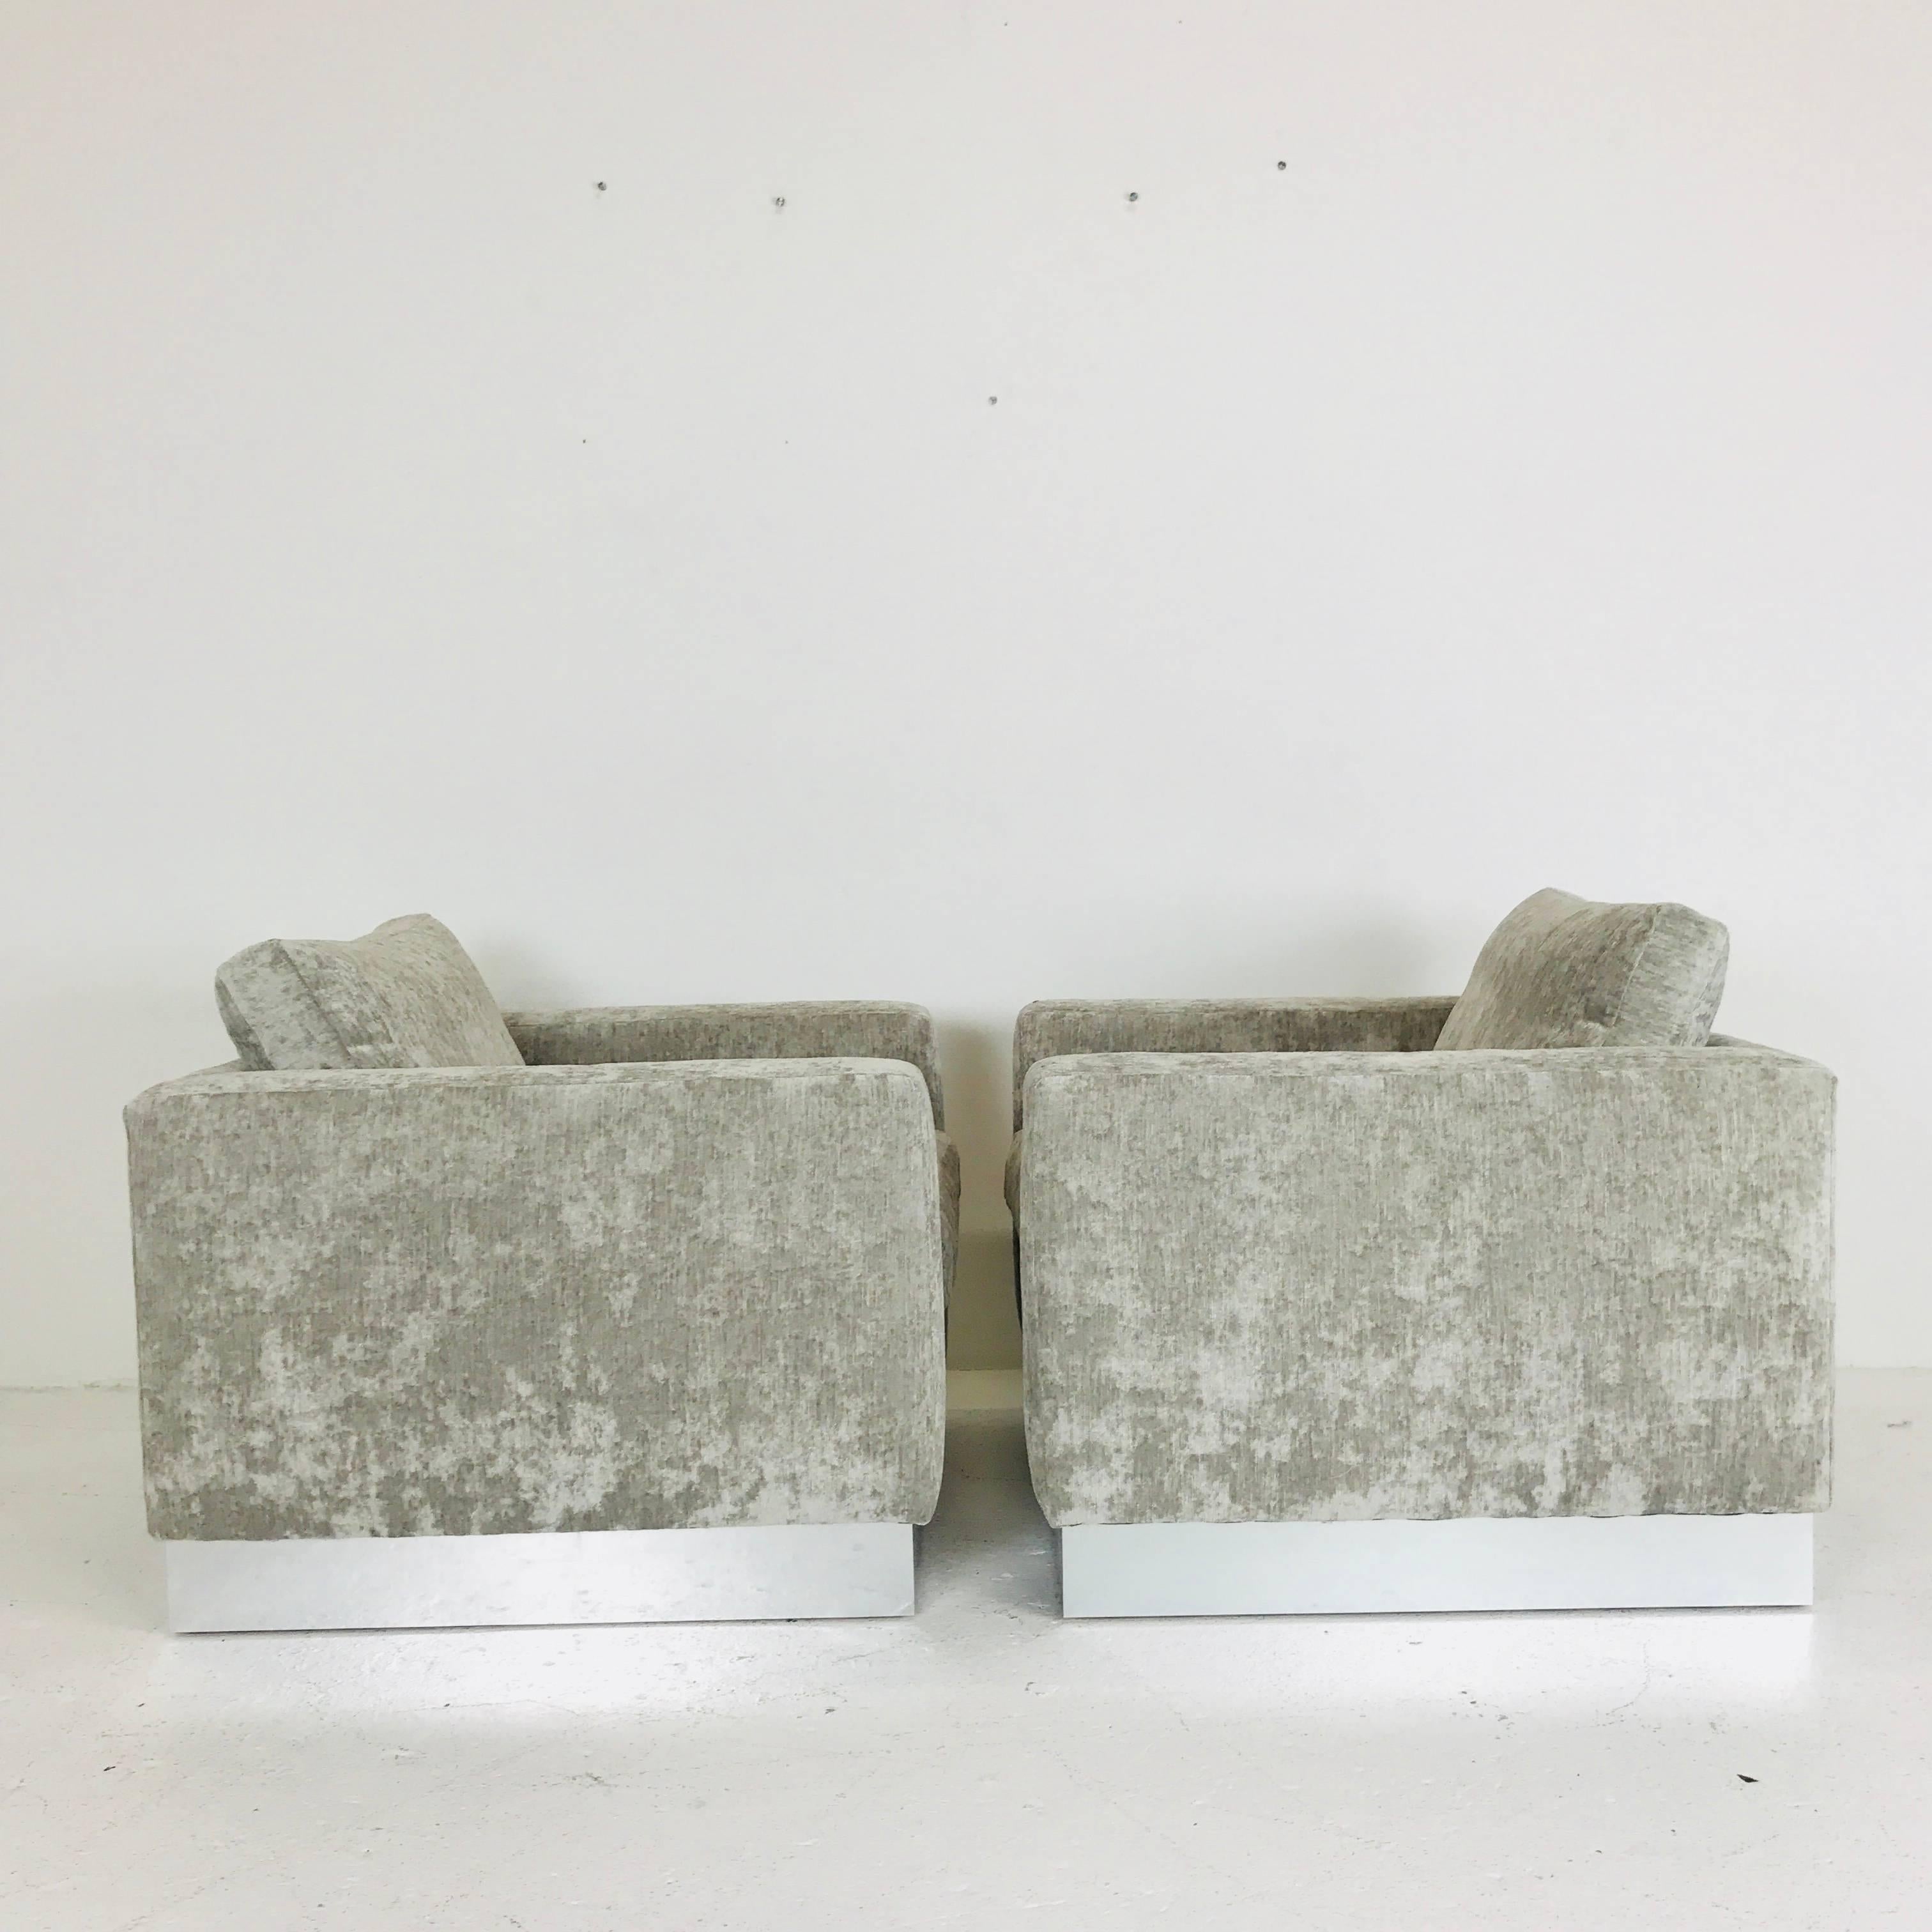 Pair of Milo Baughman Cube Chairs with Plinth Base 1